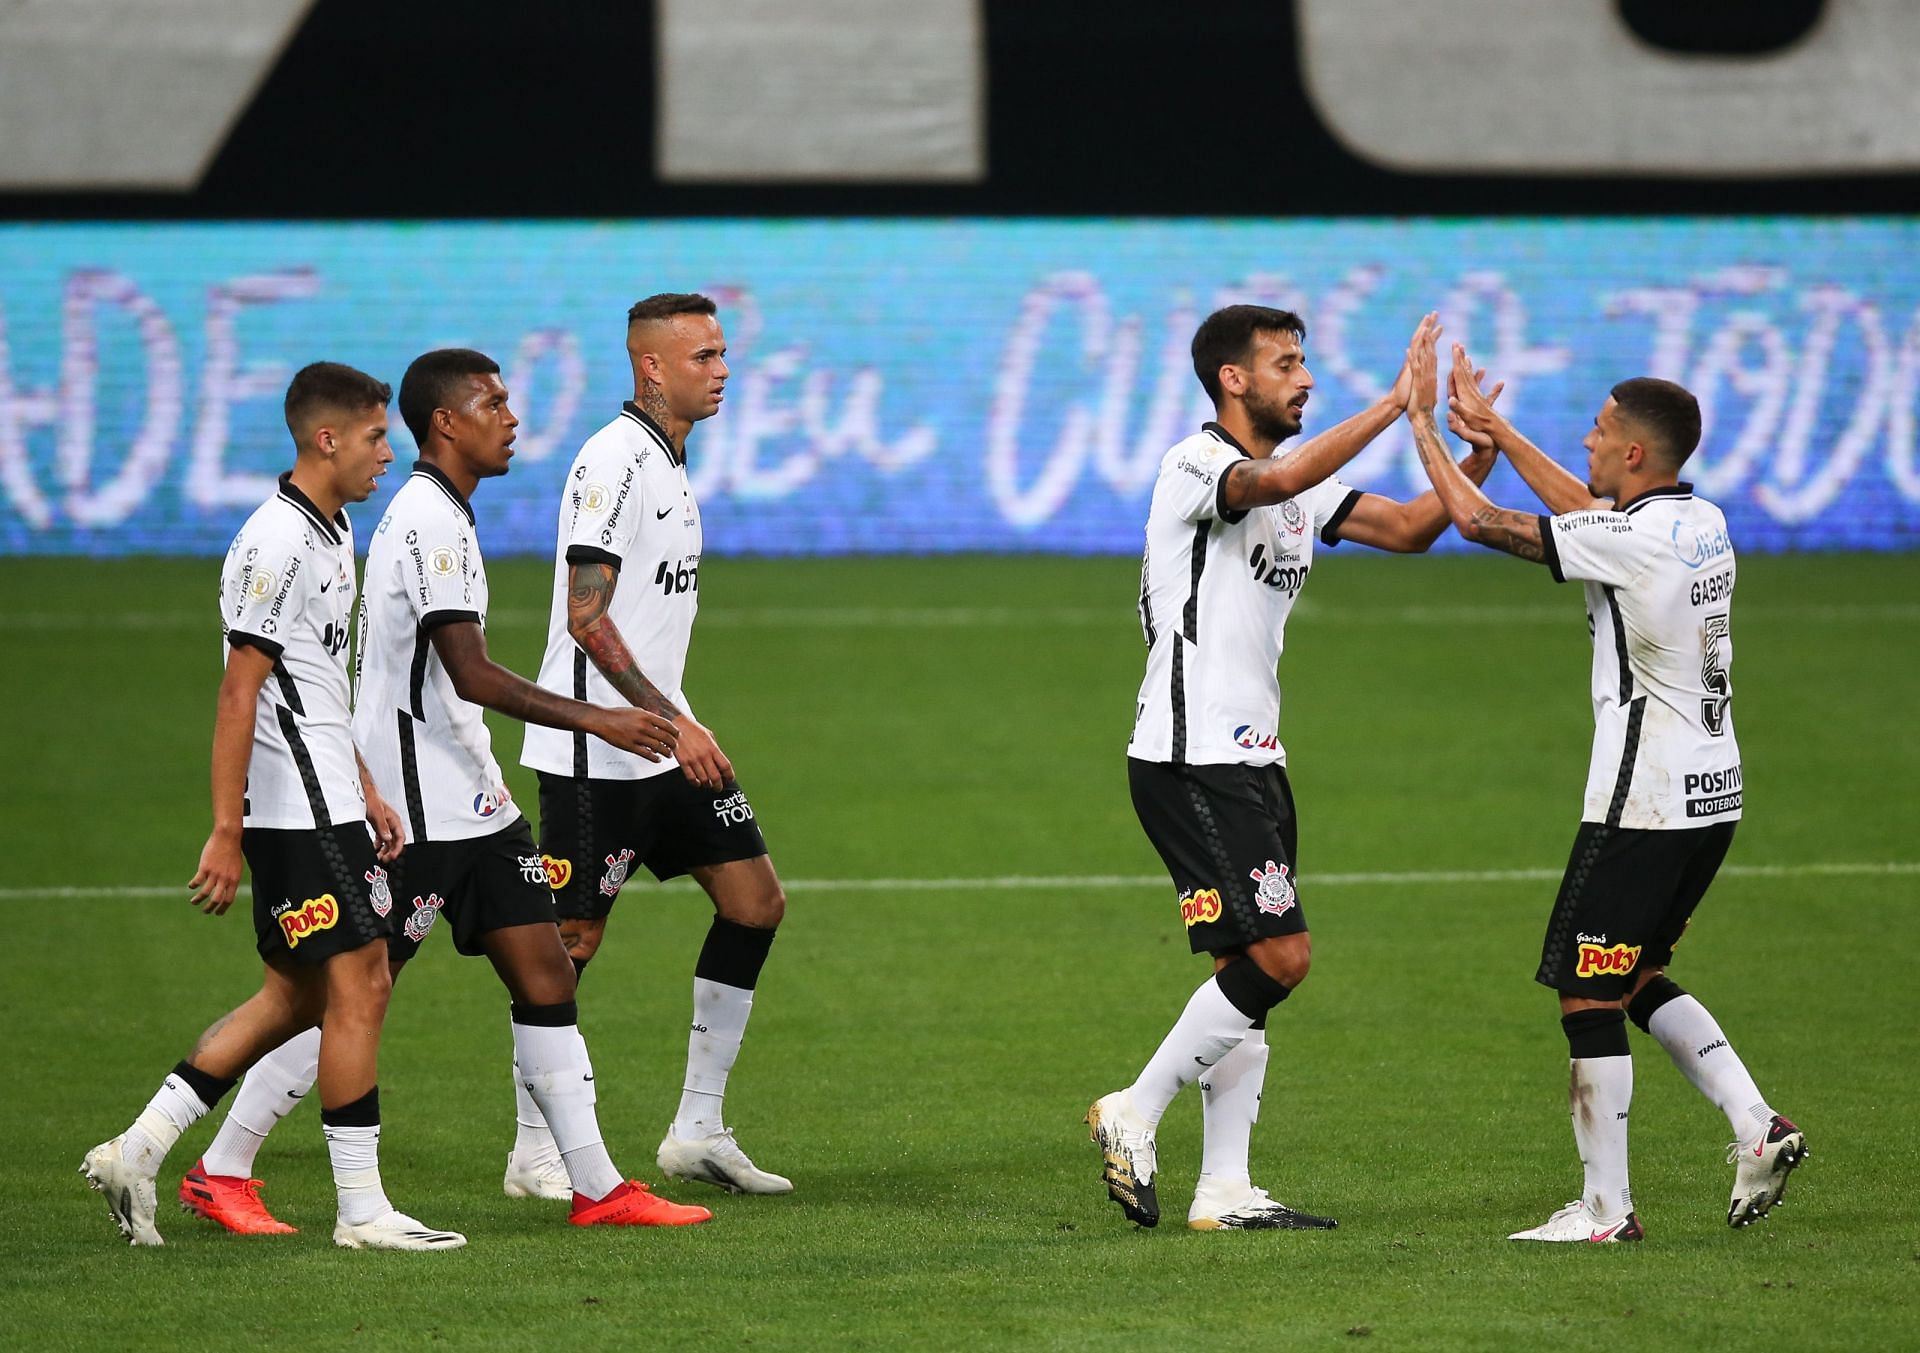 Corinthians will be looking to hit back immediately after losing their opening encounter.